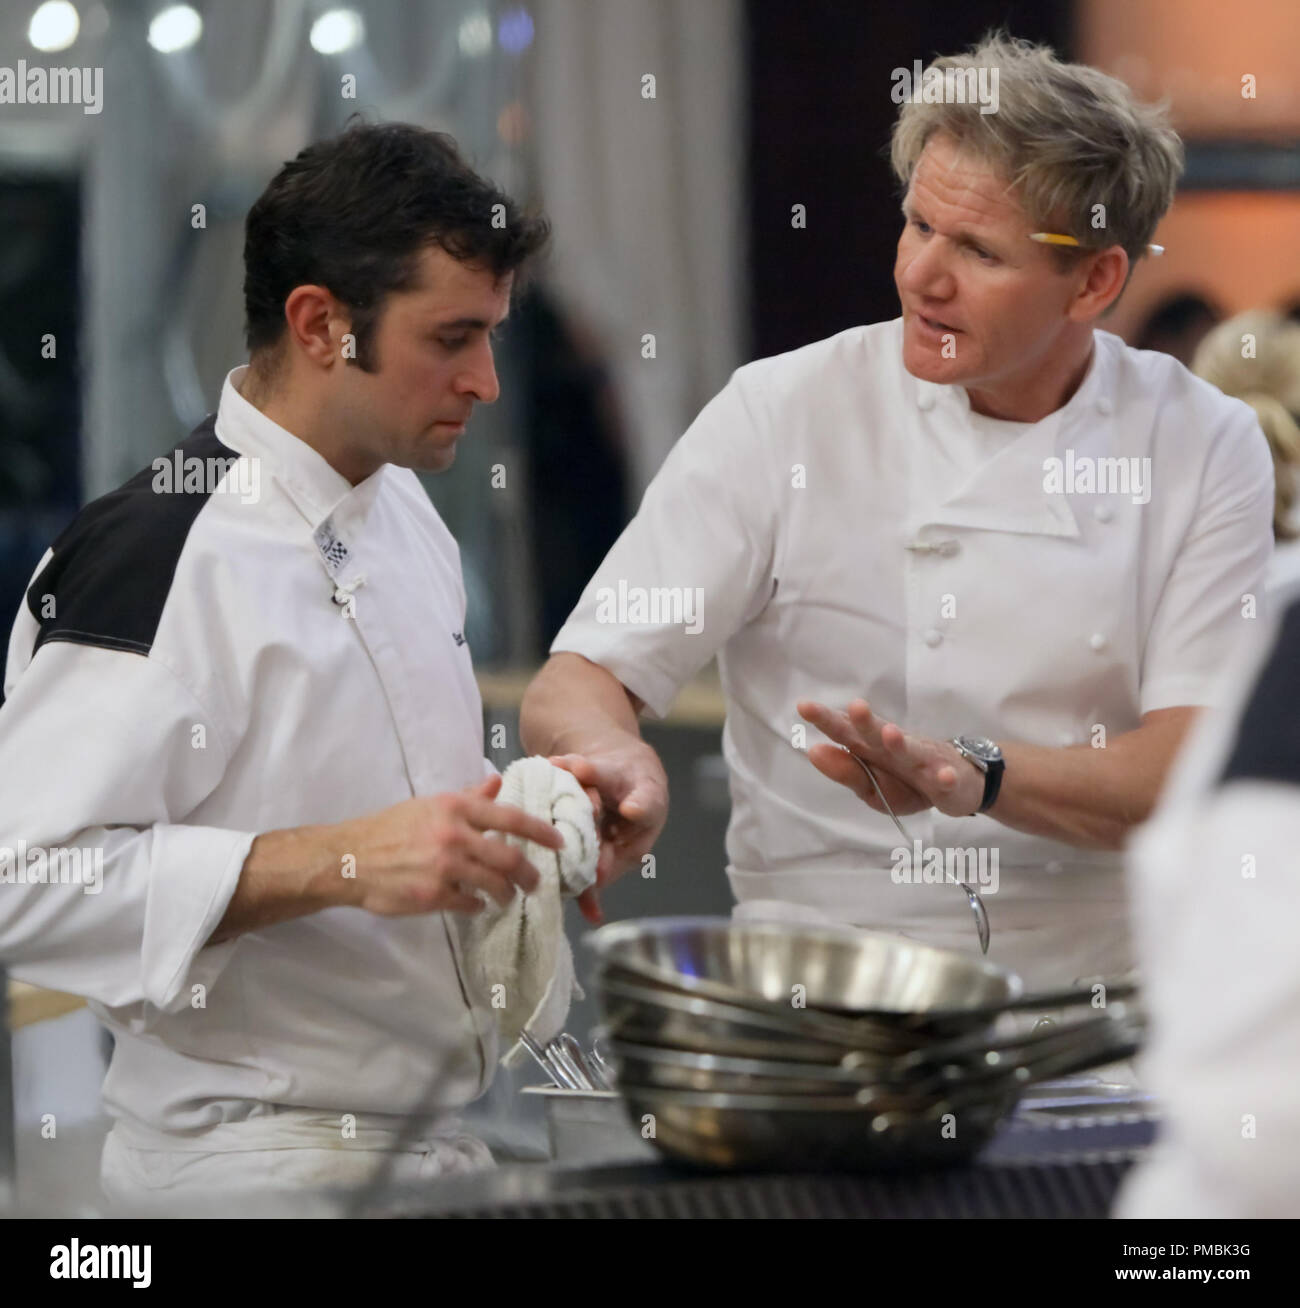 HELL'S  KITCHEN: Chef Ramsay (R) directs contestant Scott (L) during dinner service in the all-new '4 Chefs Compete' episode of HELL'S KITCHEN Stock Photo